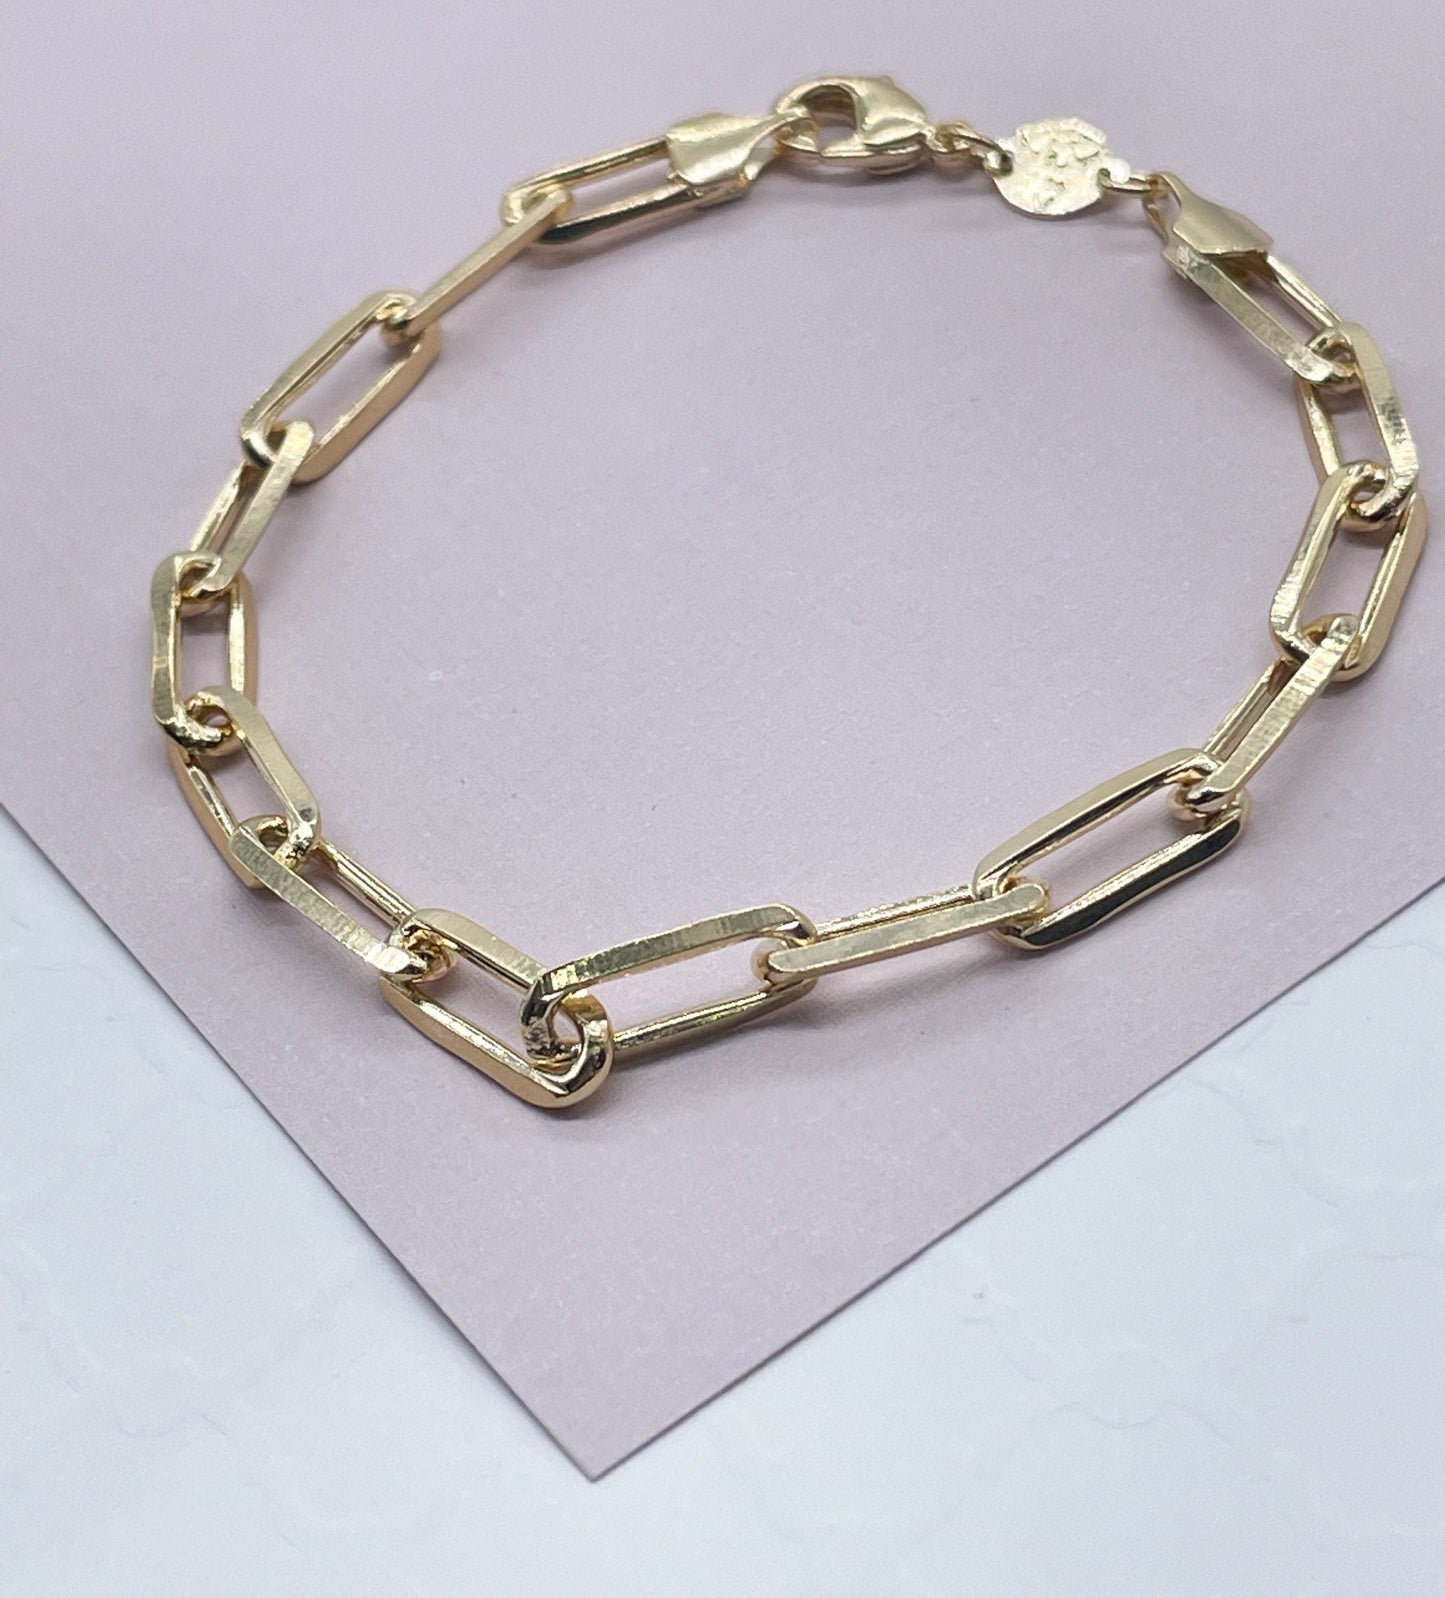 Vintage Style Paper Clip Chain in 18k Gold Layered Necklace or Bracelet Wholesale